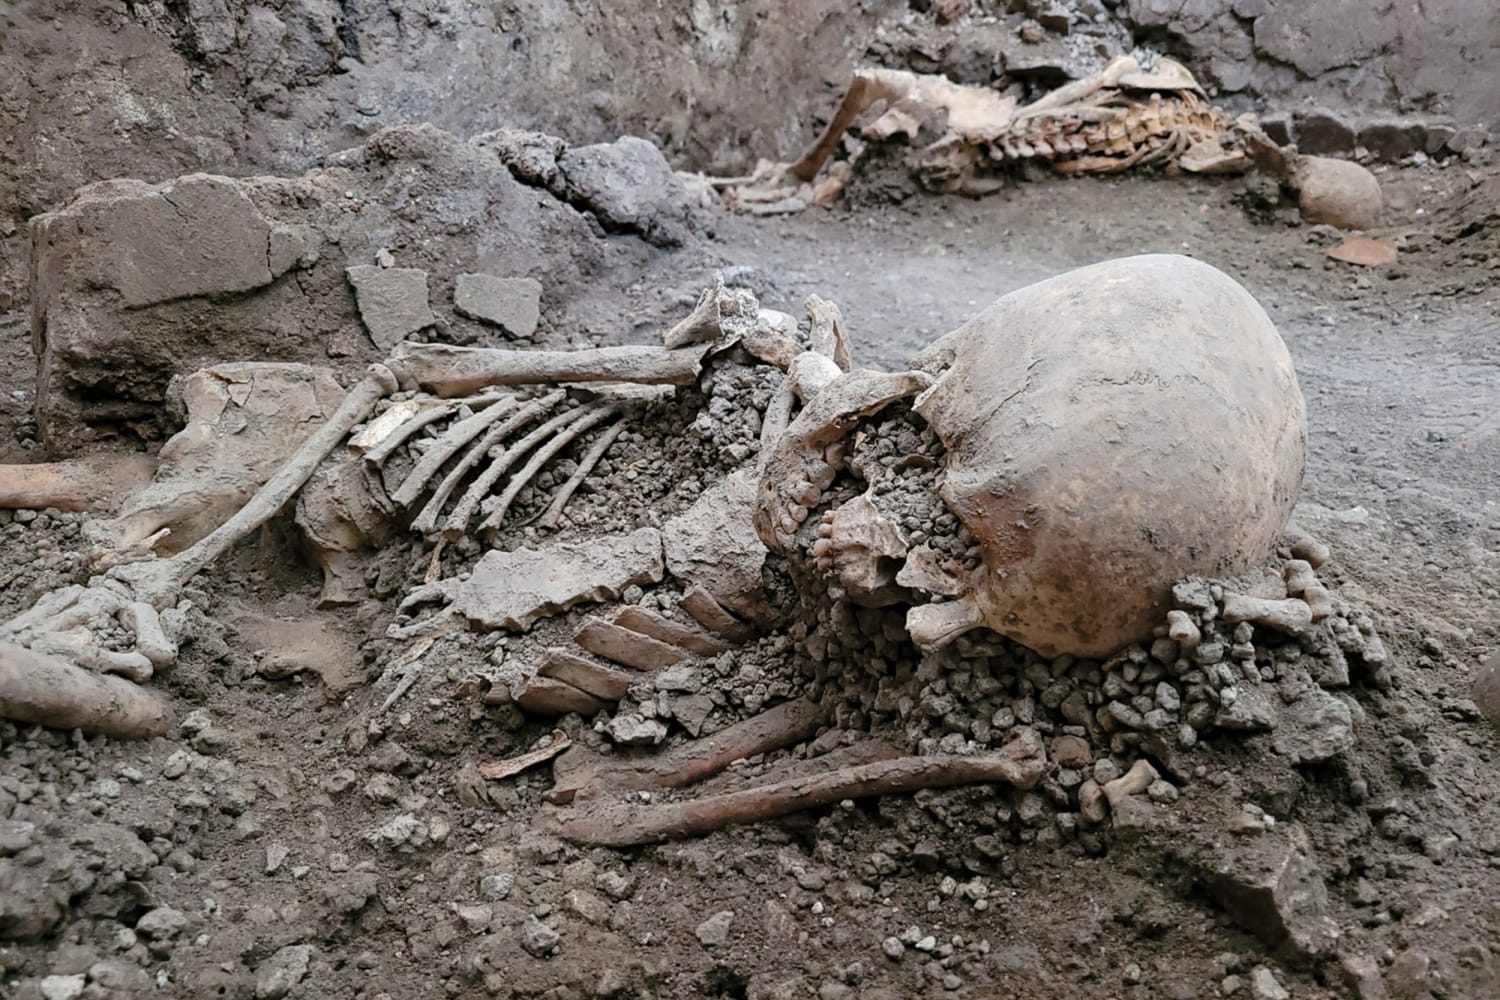 Pompeii’s victims weren’t killed only by a volcanic eruption, newly unearthed skeletons show